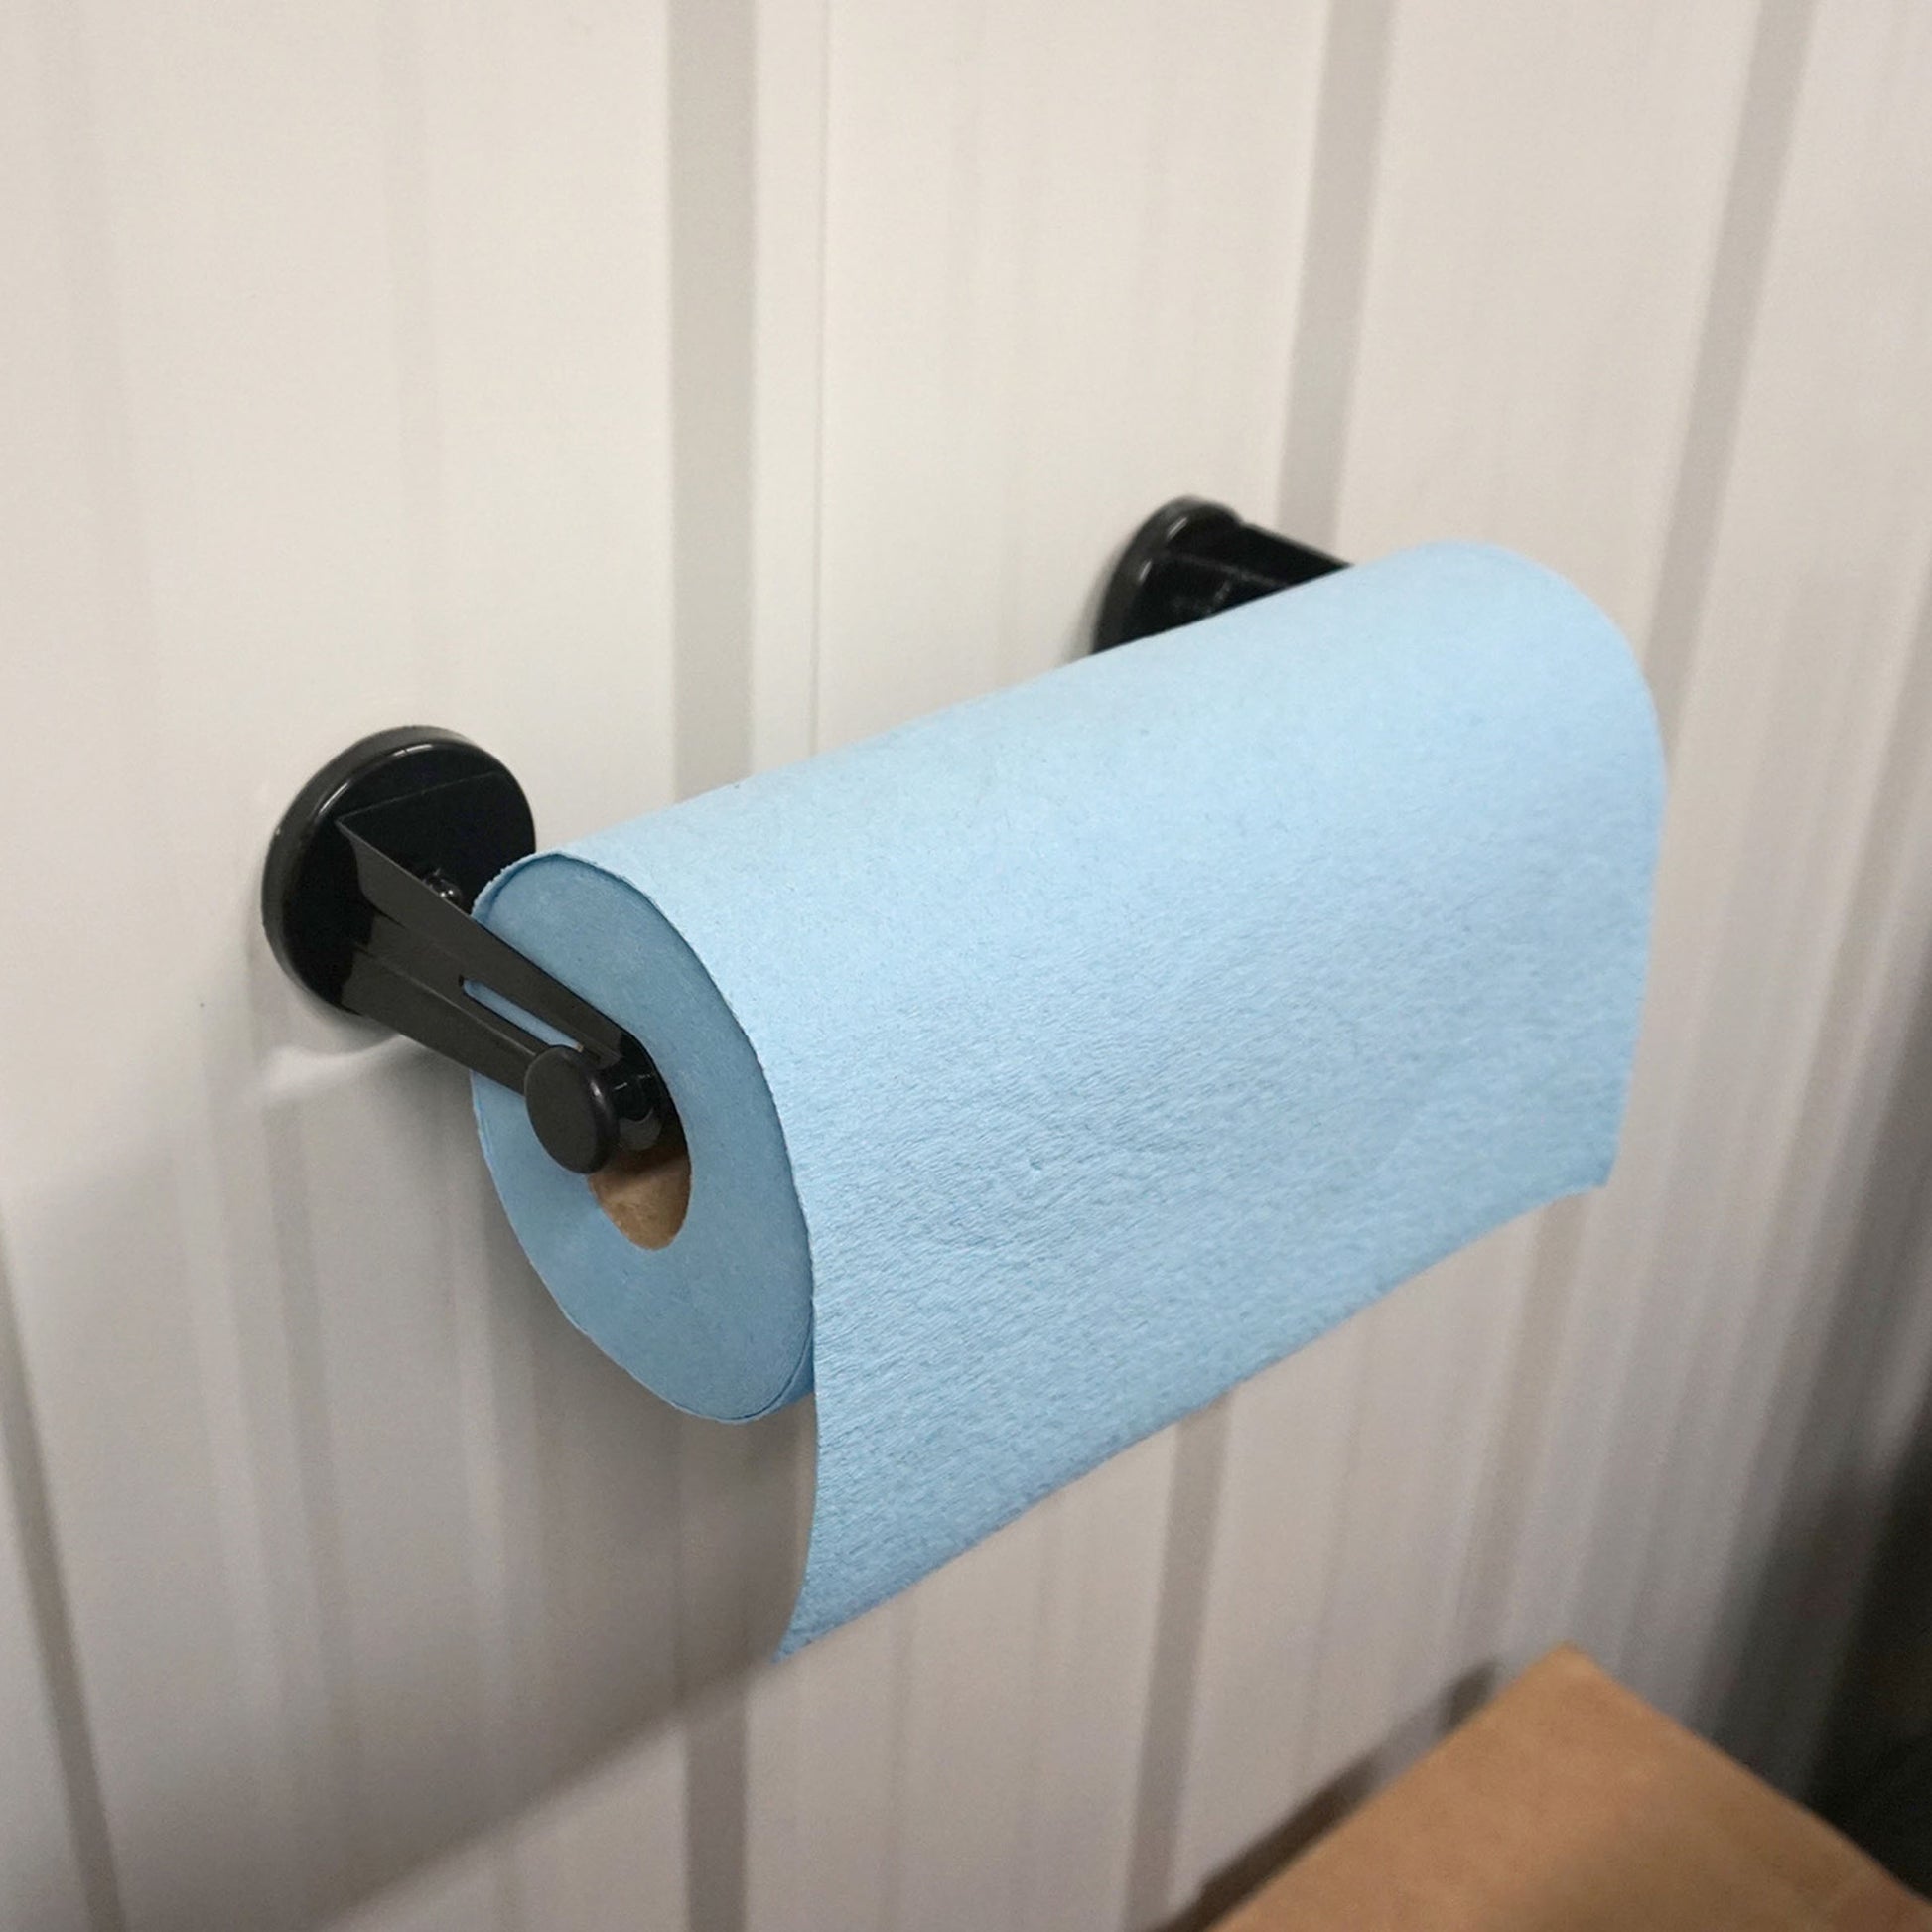 Load image into Gallery viewer, 07549 Handy Holder™ Magnetic Paper Towel Holder - In Use